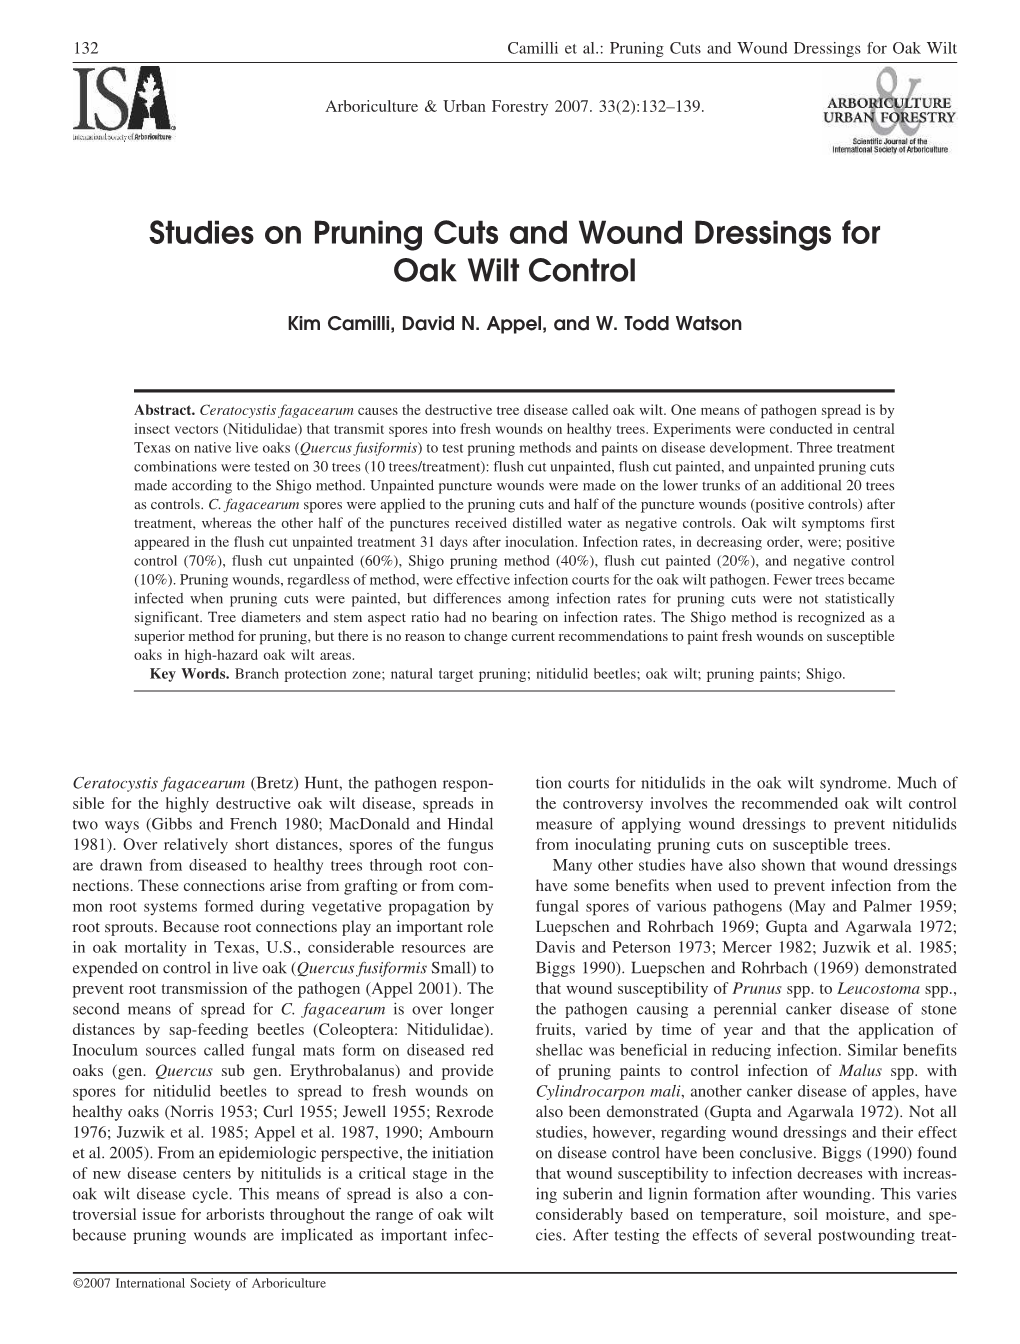 Studies on Pruning Cuts and Wound Dressings for Oak Wilt Control